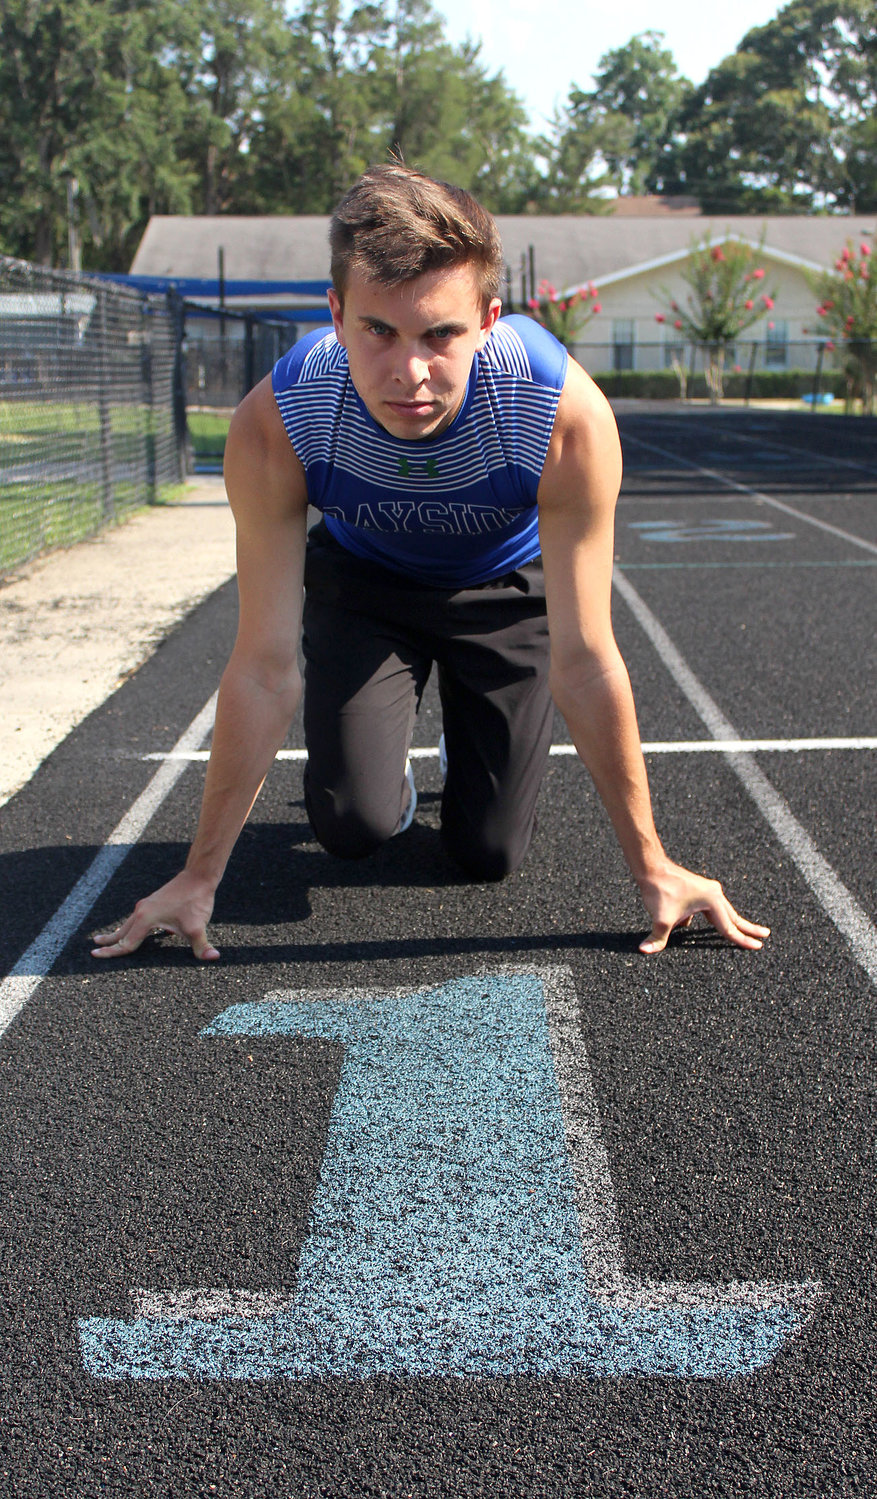 Patrick Daves registered 17 first-place finishes at state championship meets on the indoor and outdoor track circuit during his time at Bayside Academy. Now he eyes to further his career at the University of Alabama this fall.